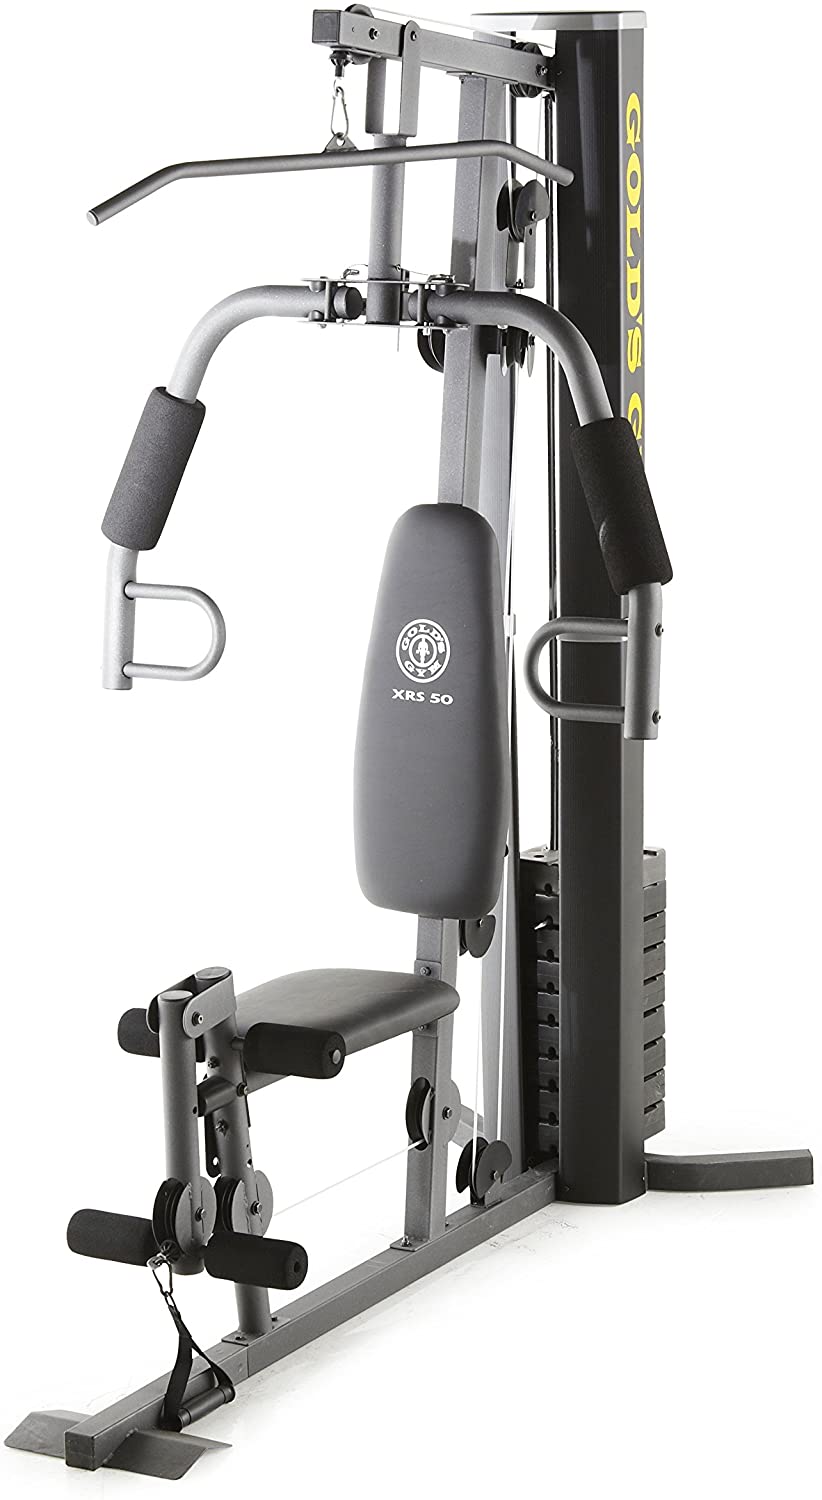 Review of ICON Fitness Gold's Gym XRS 50